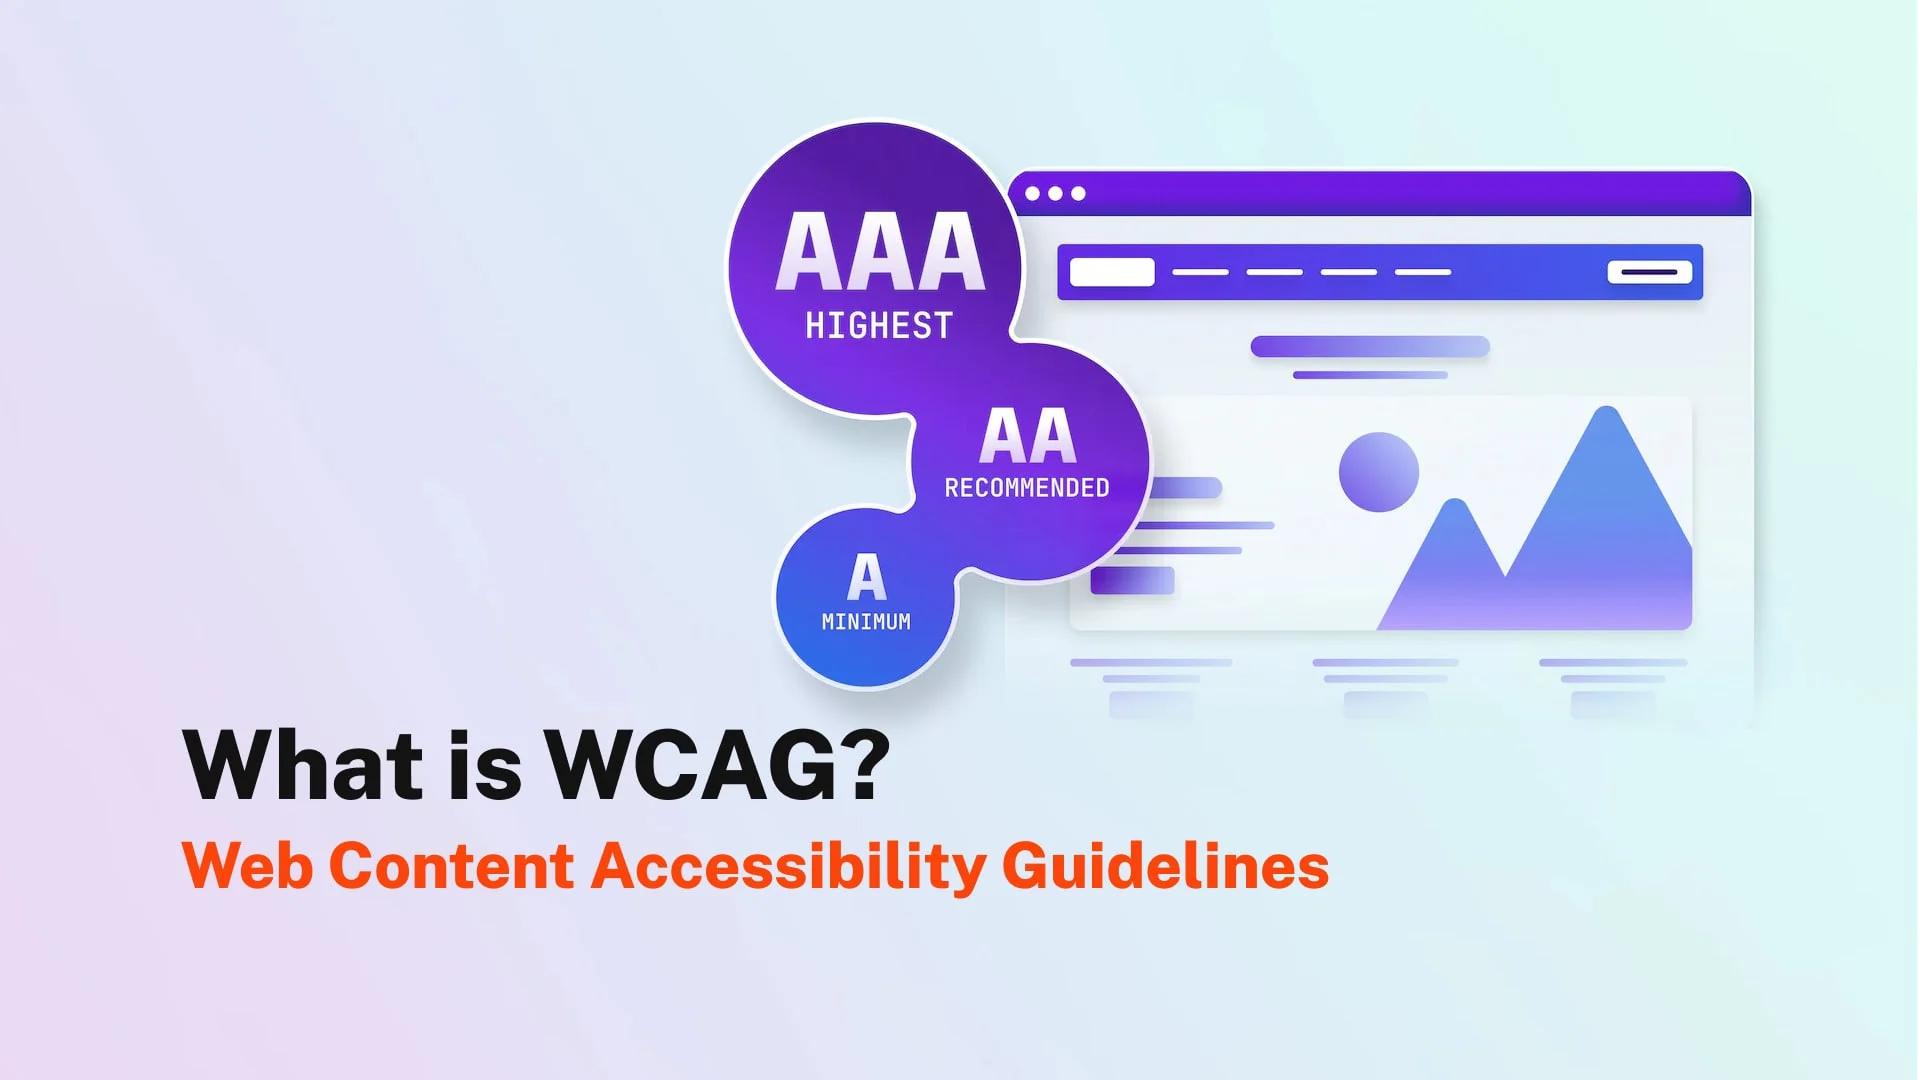 What is WCAG and its importance for digital accessibility?